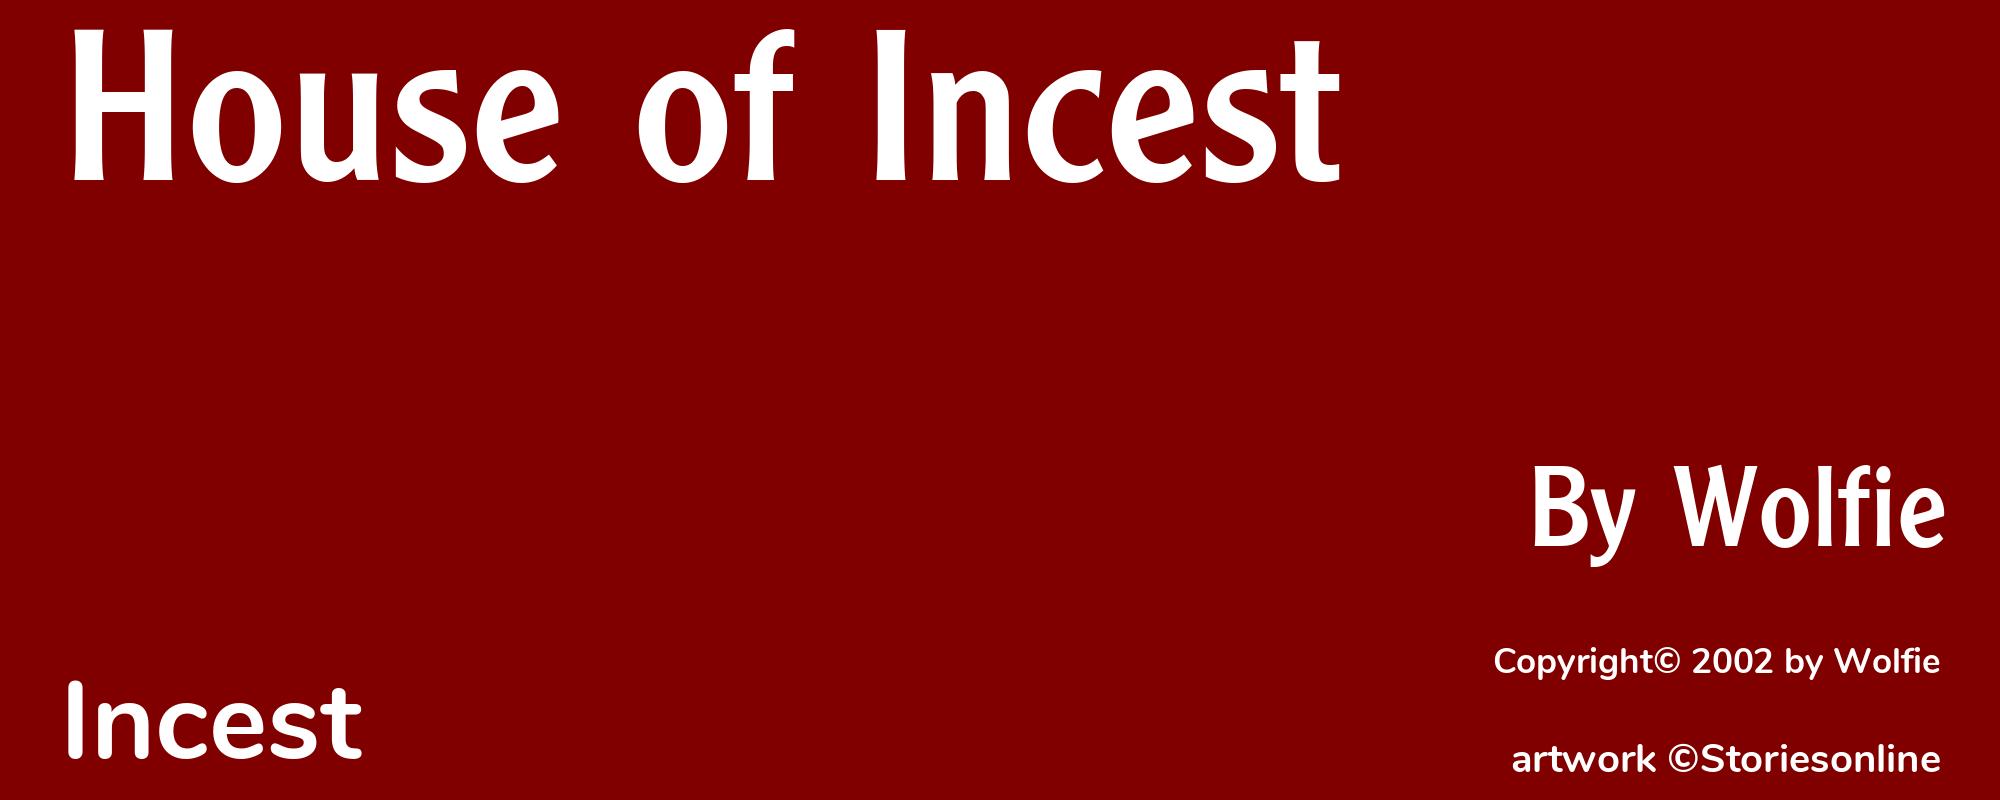 House of Incest - Cover